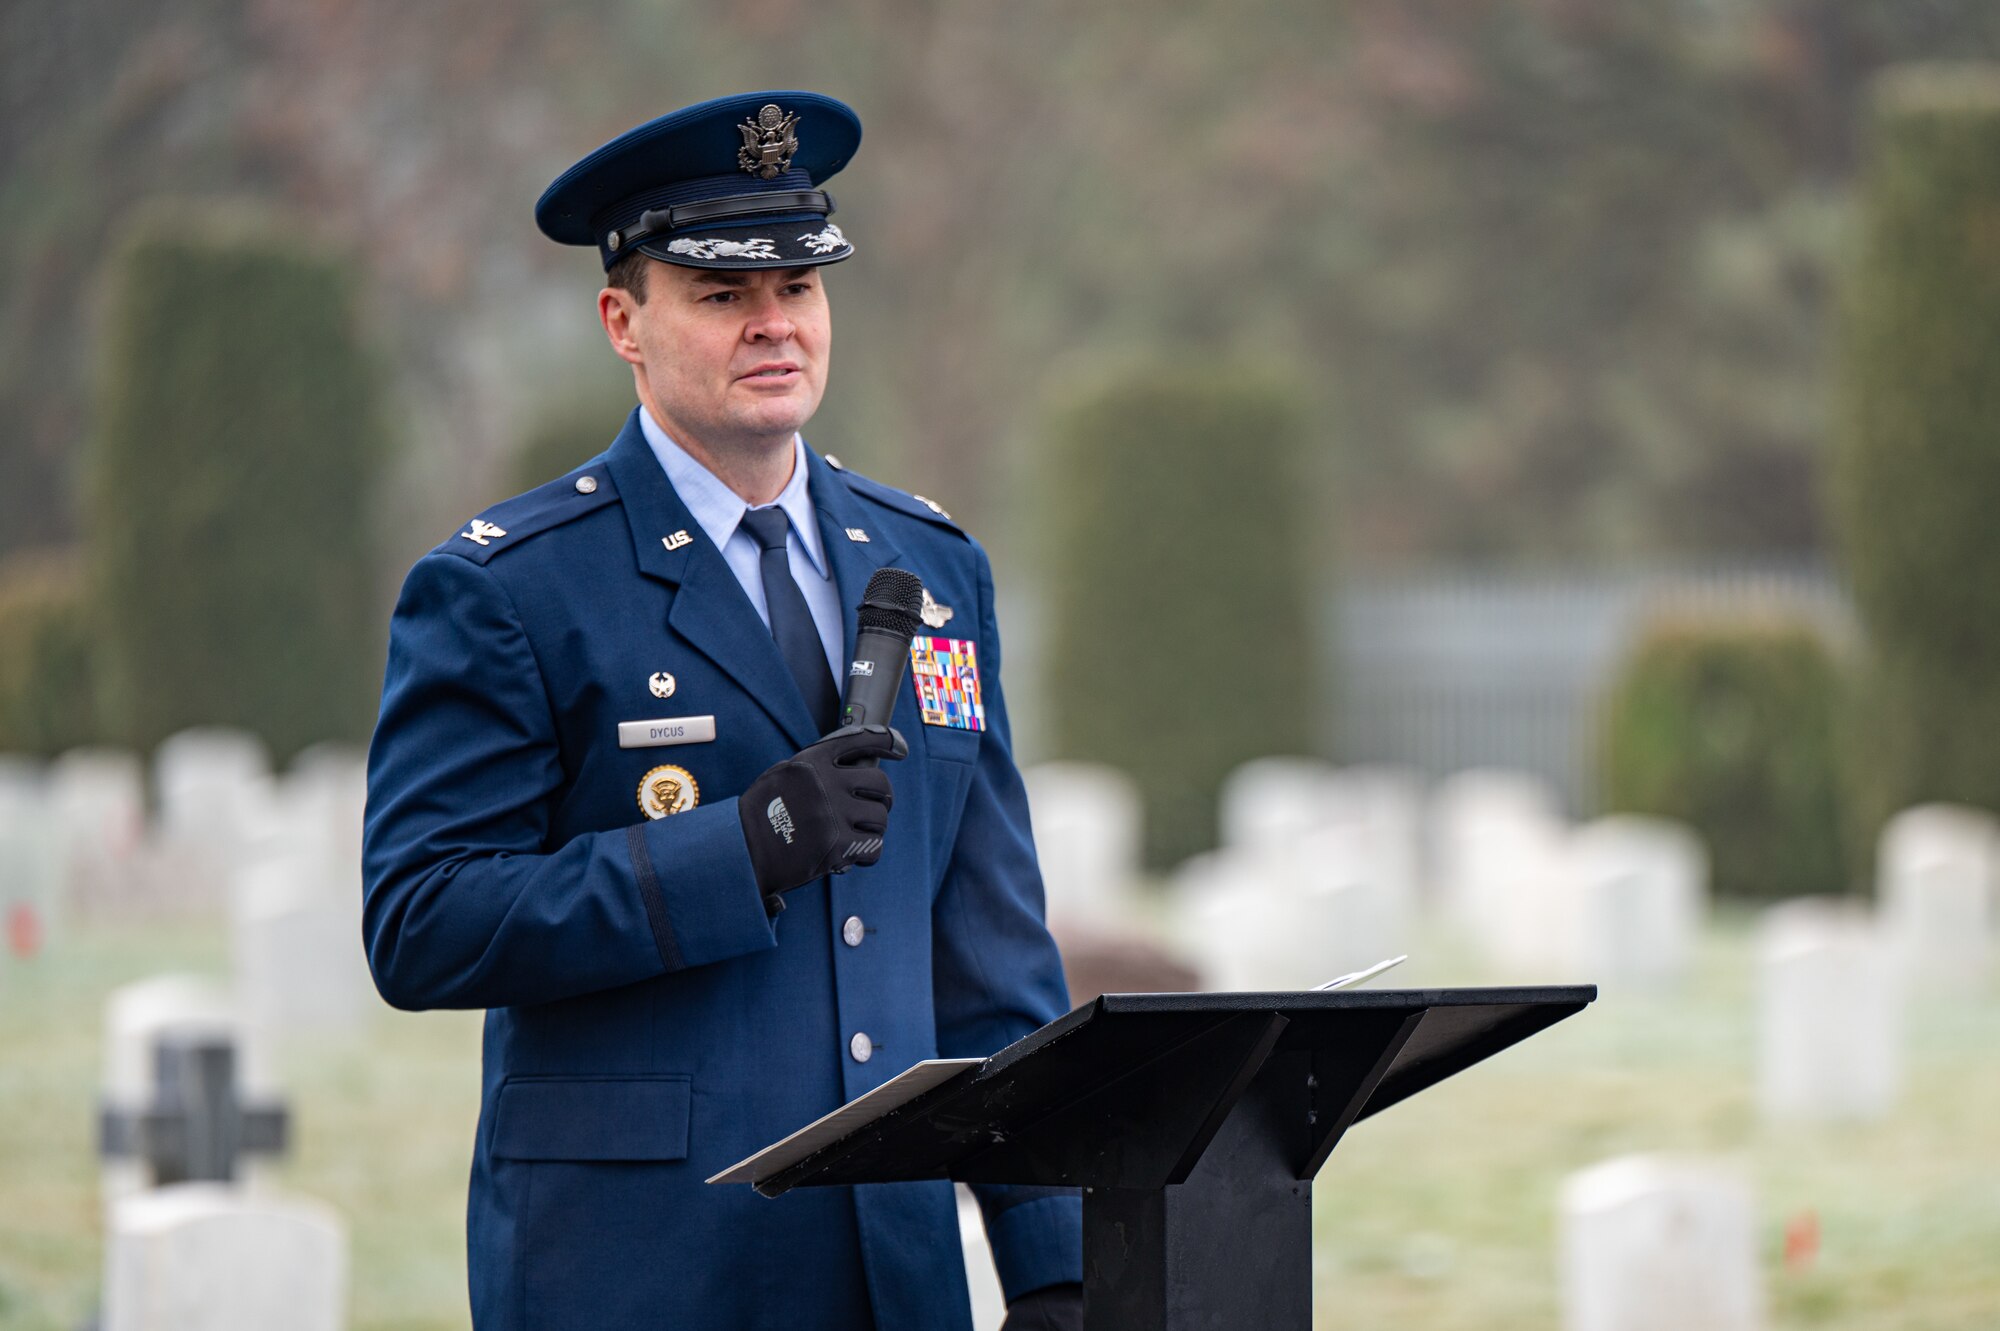 An Air Force colonel speaks at a podium